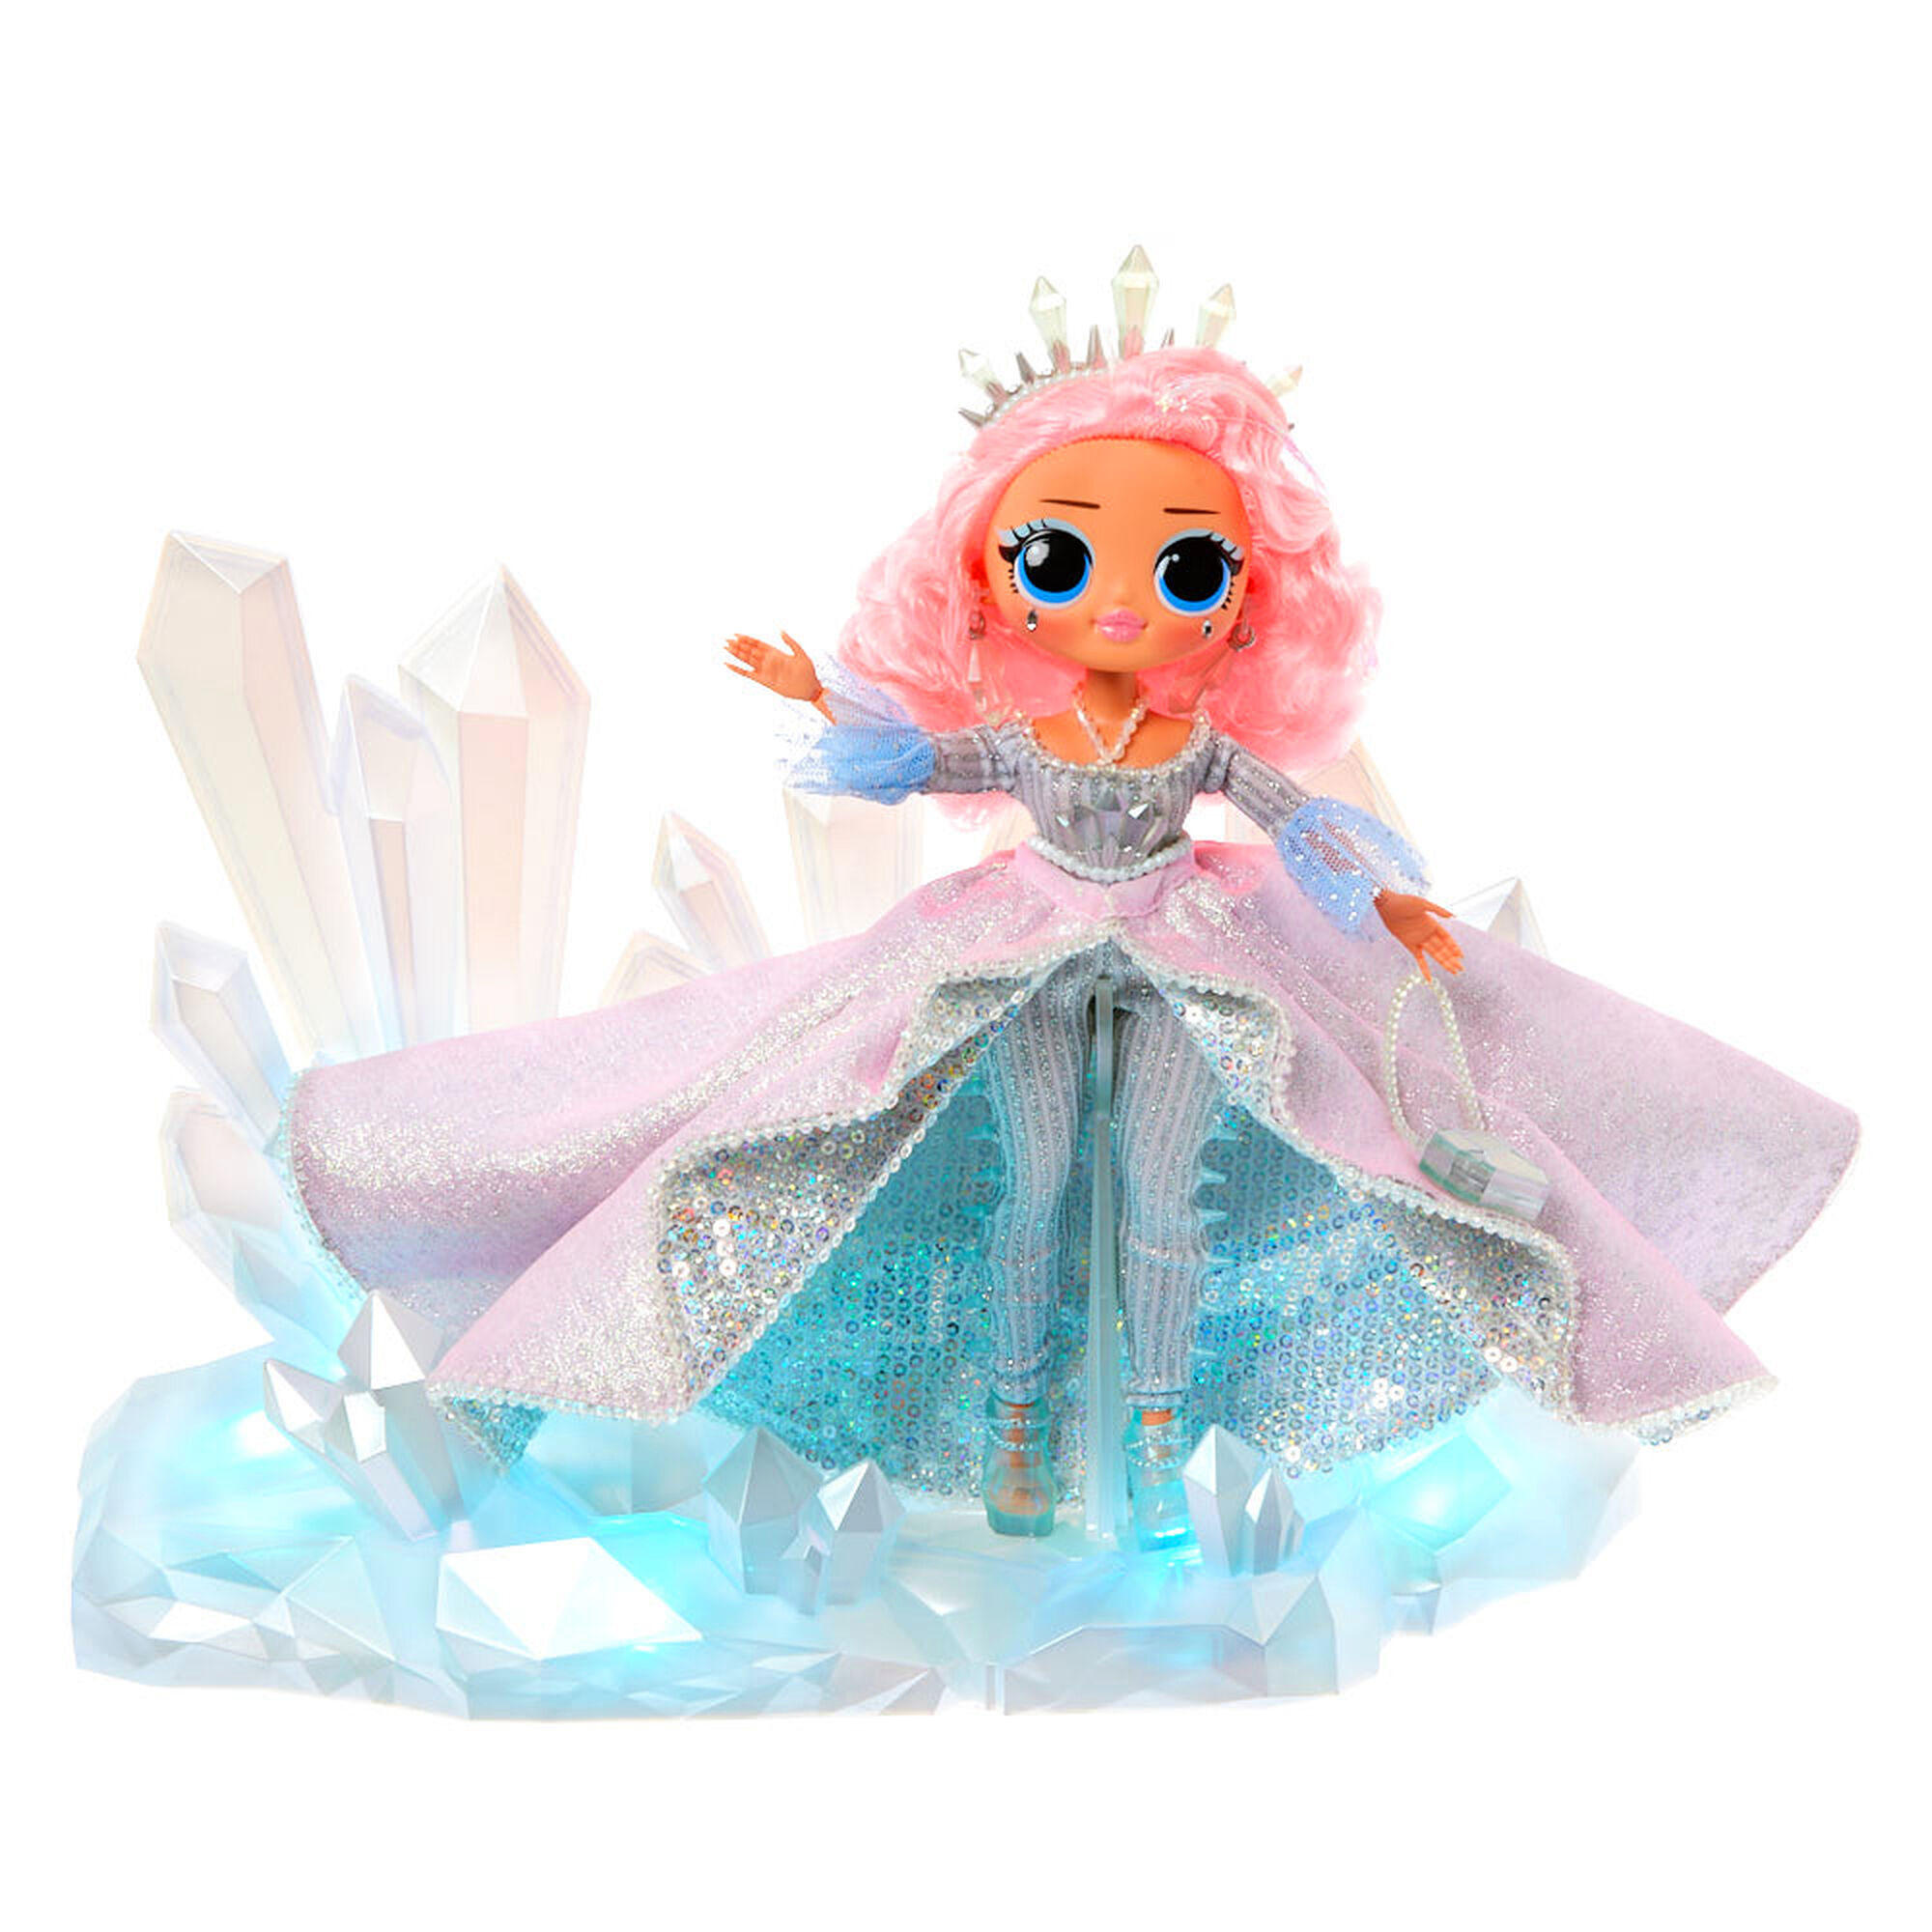 L.O.L. Surprise!™ O.M.G. Winter Disco Doll - Limited Edition | Claire's US